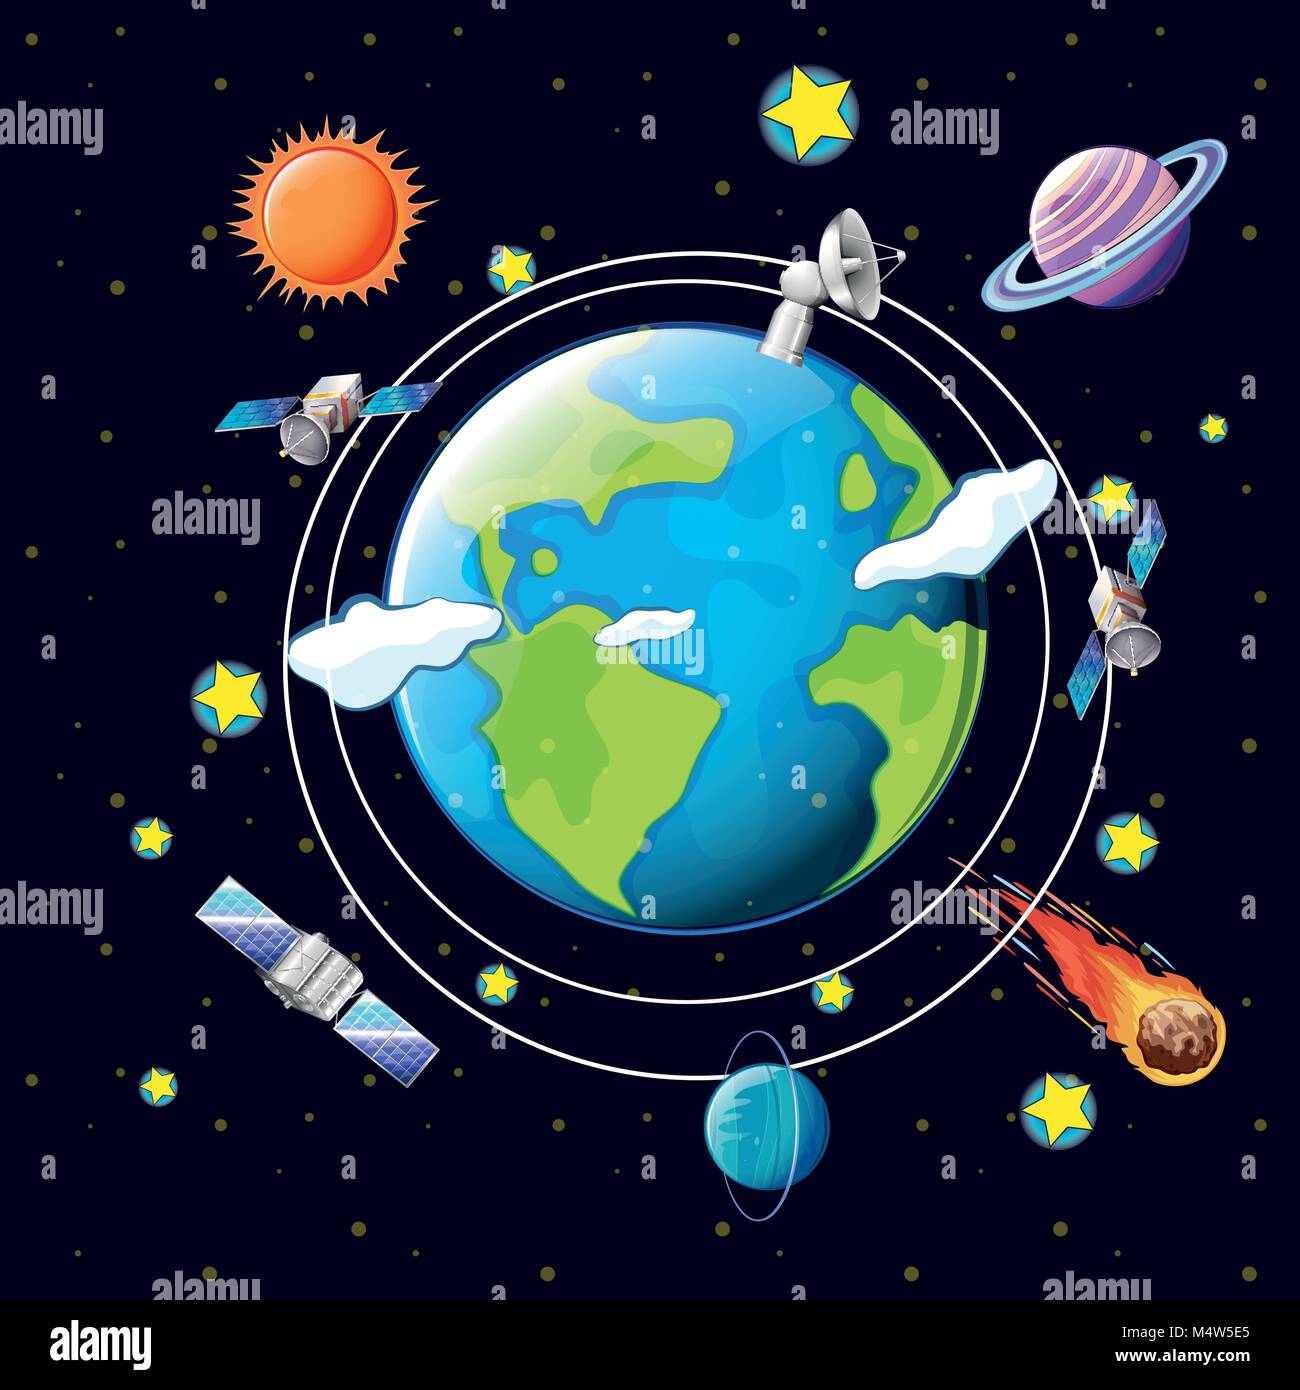 Space theme with satellites and planets around earth illustration Stock Vector